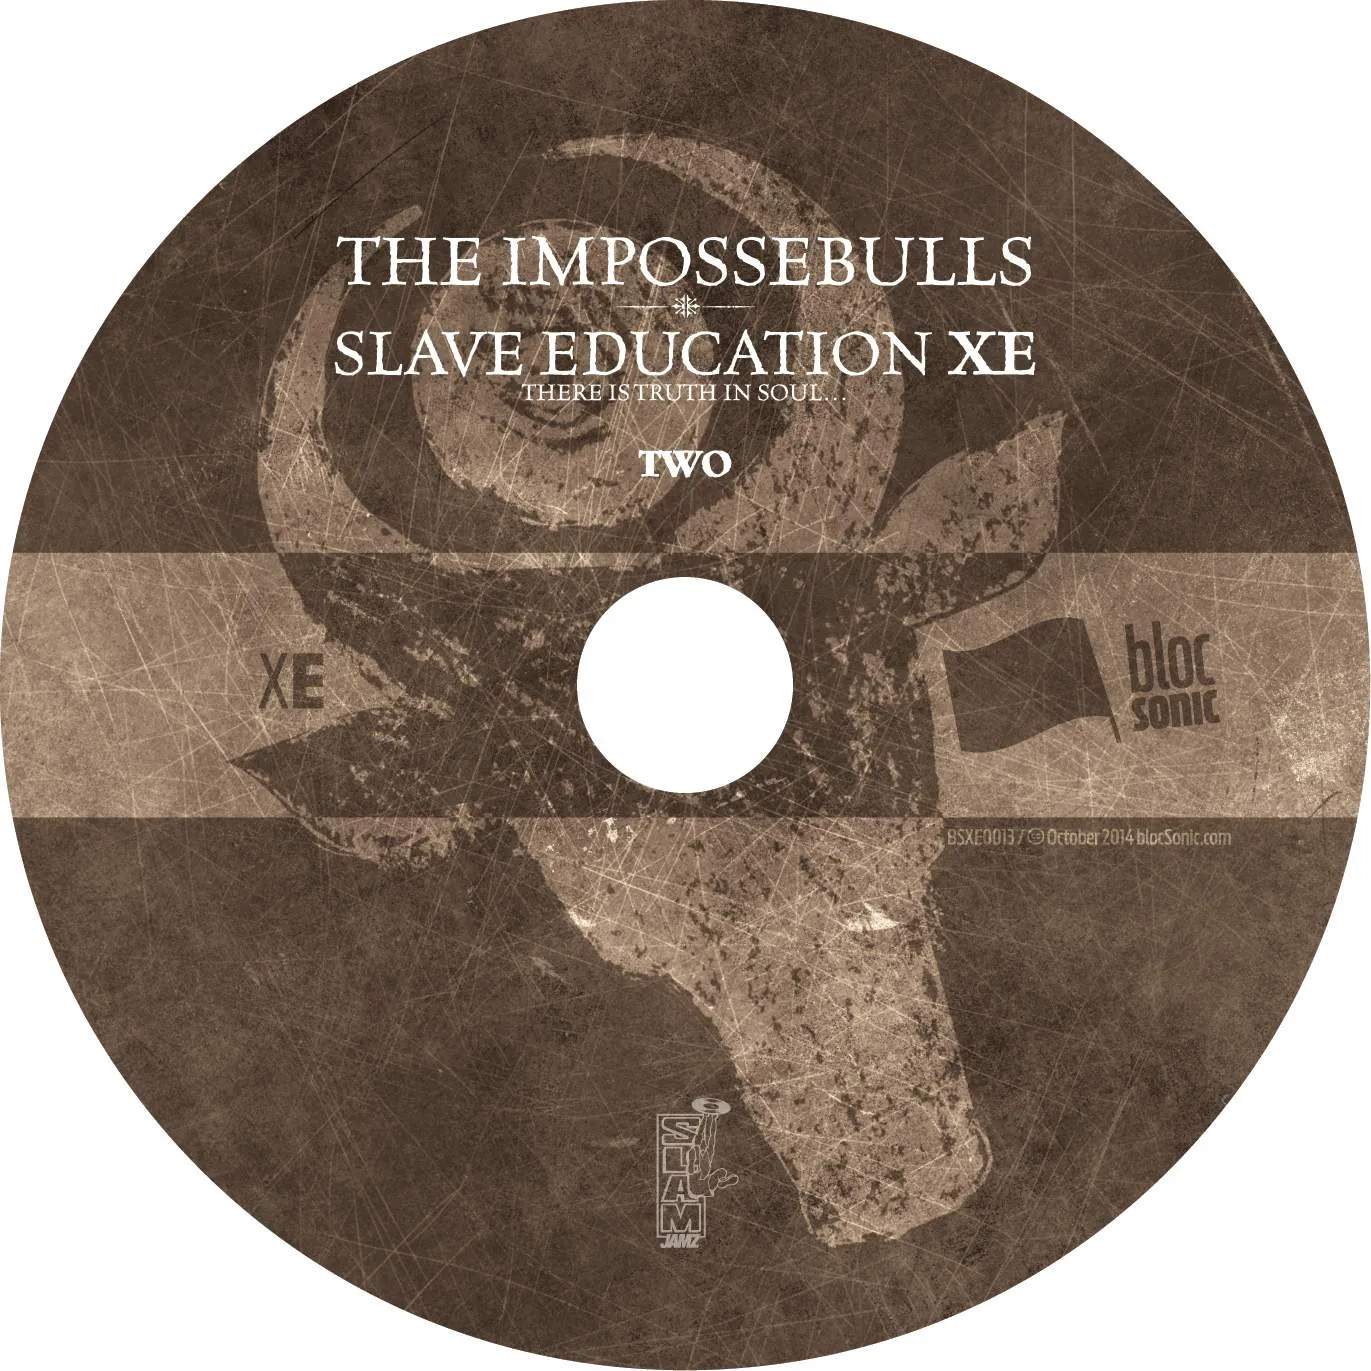 Album disc for “Slave Education XE” by The Impossebulls